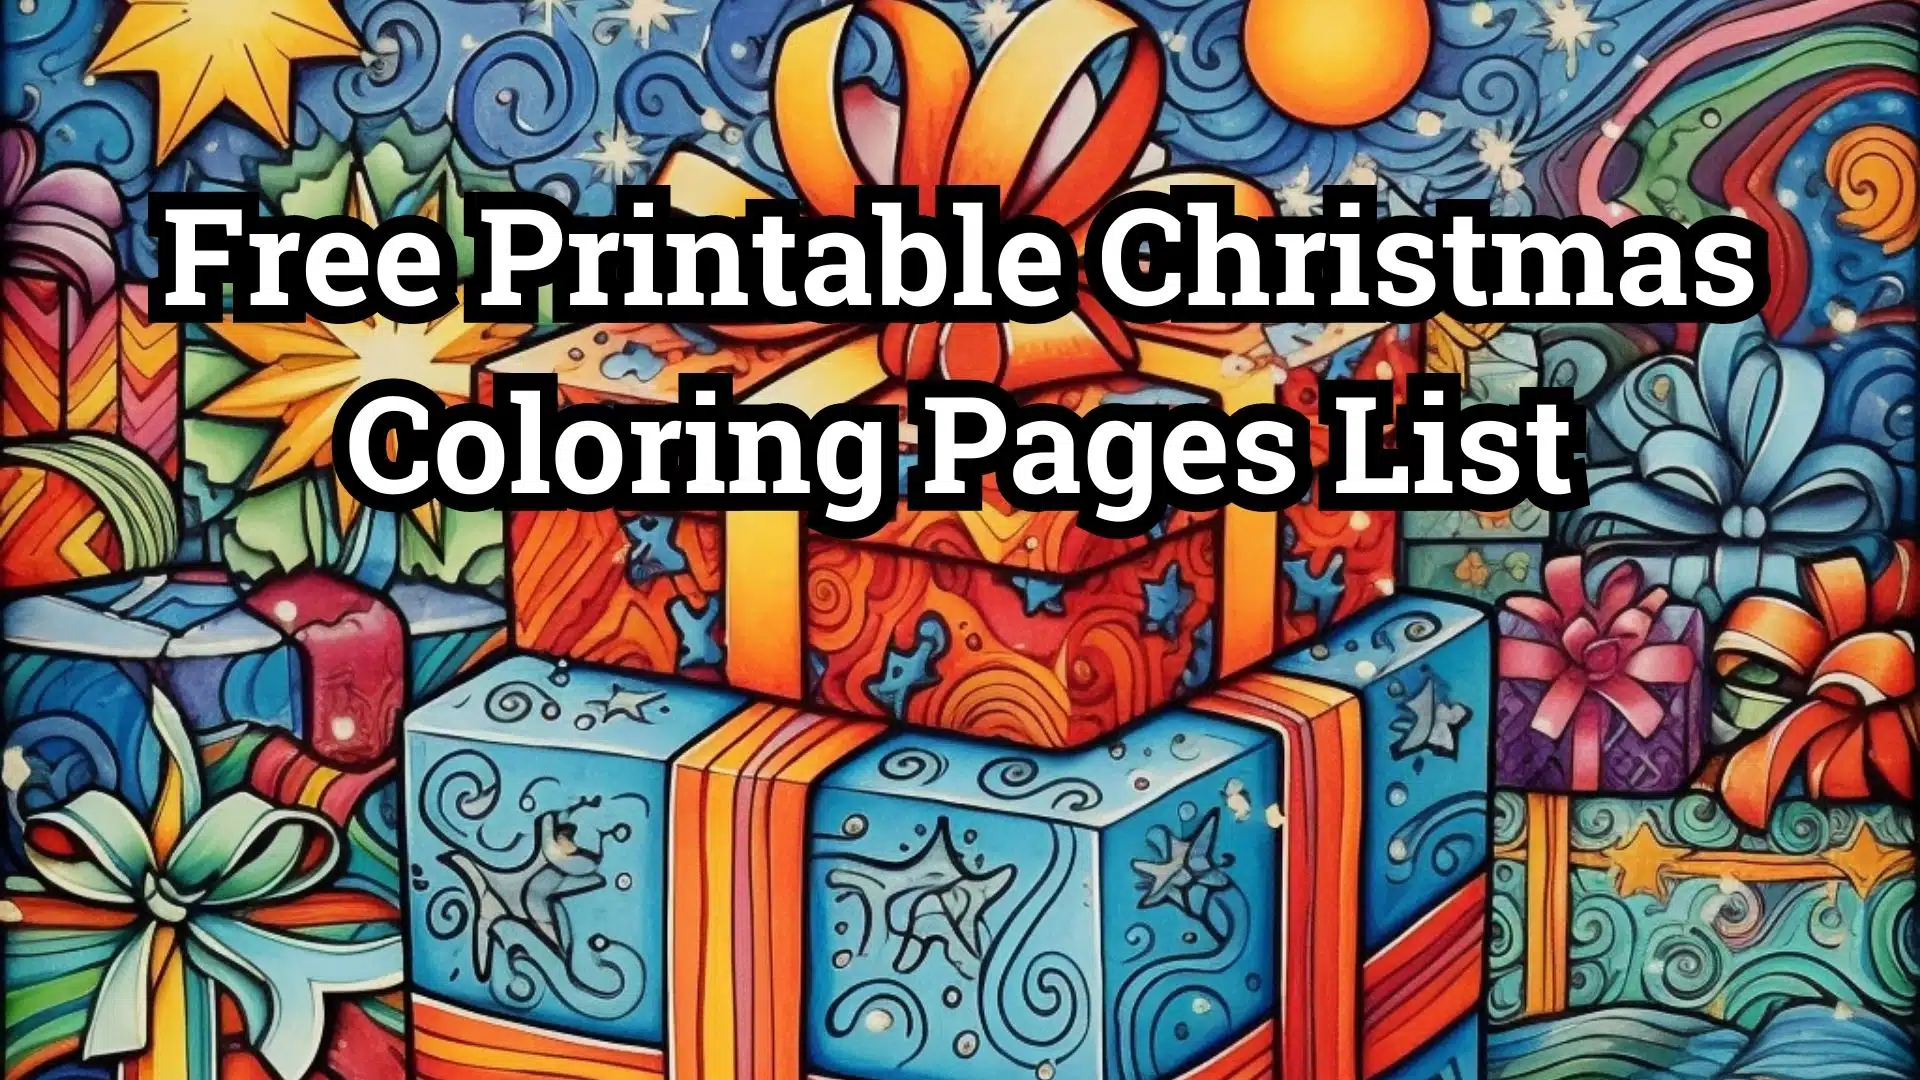 Free Printable Christmas Coloring Pages List